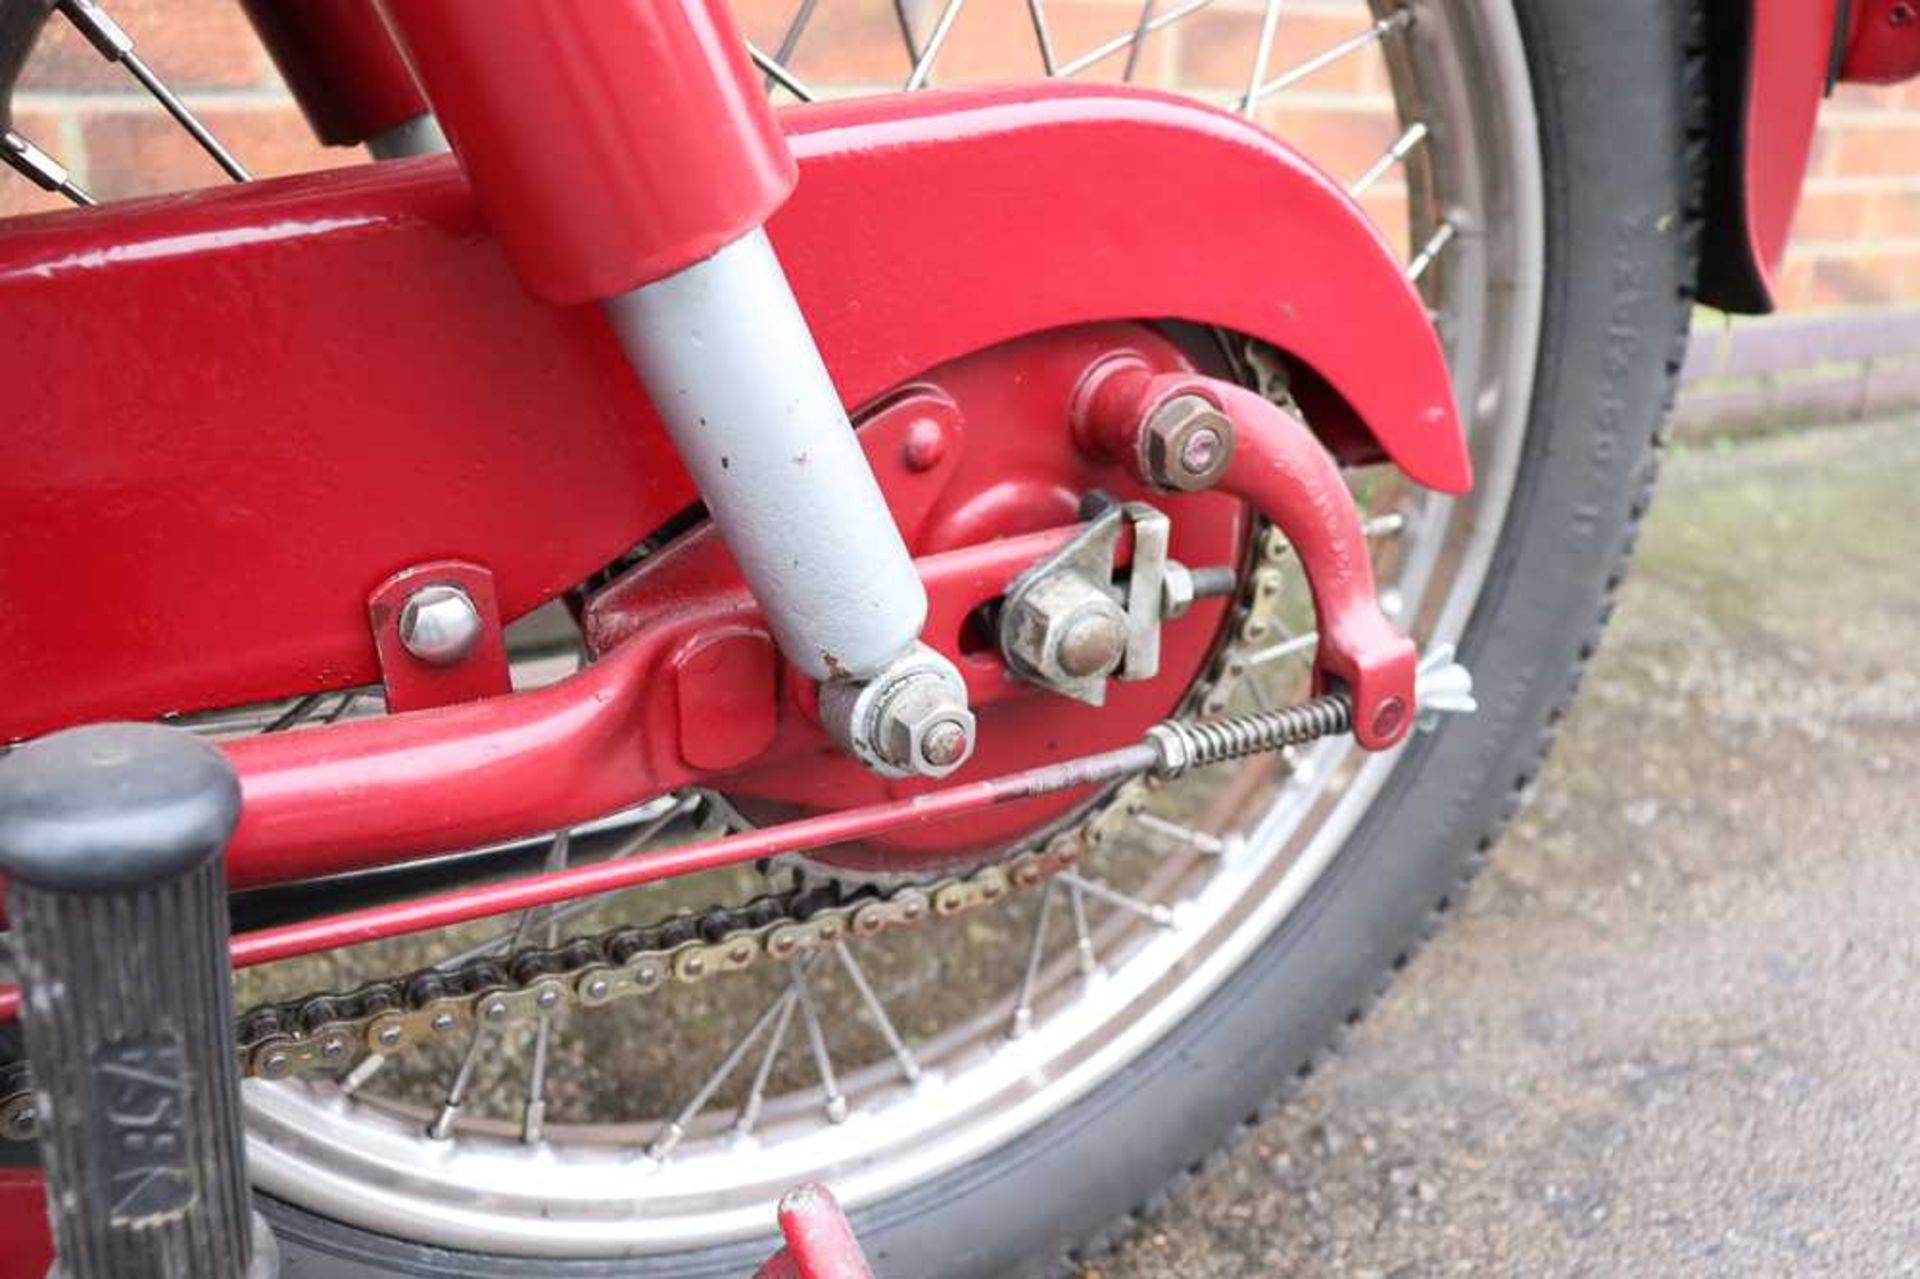 1956 BSA C12 Stainless steel rims and spokes - Image 29 of 44